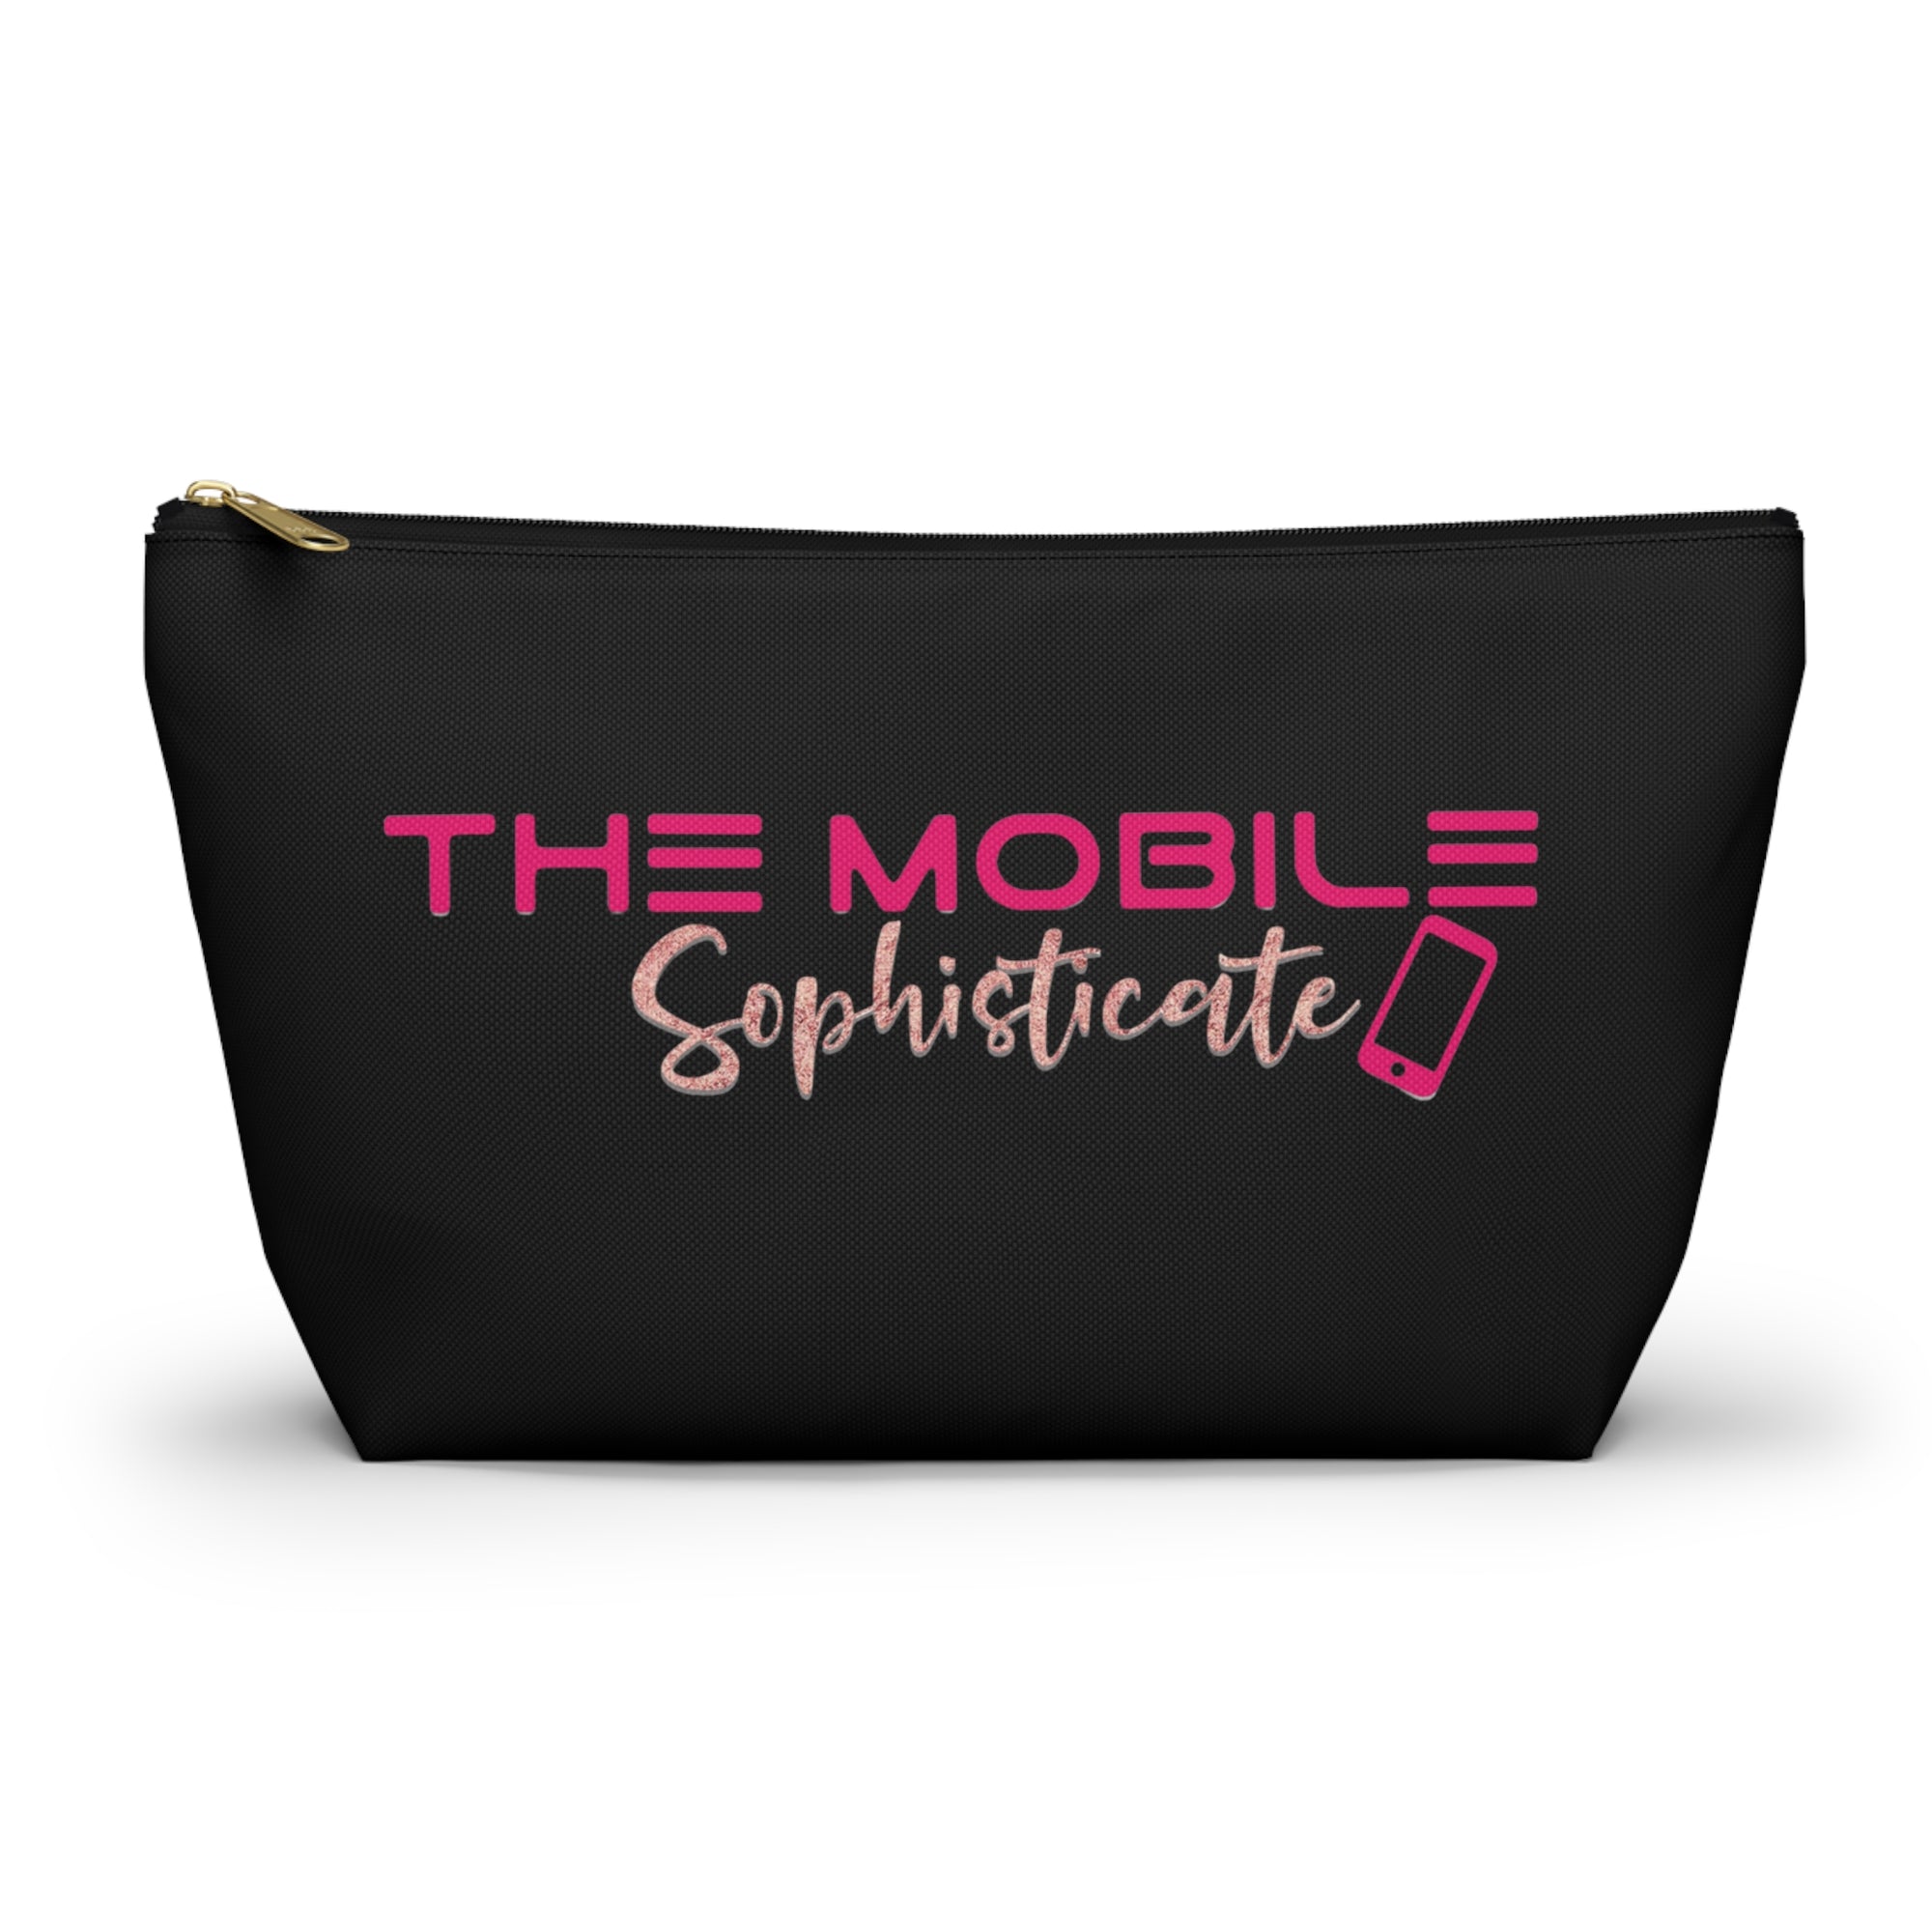 The Mobile Sophisticate Accessory Pouch with T-bottom